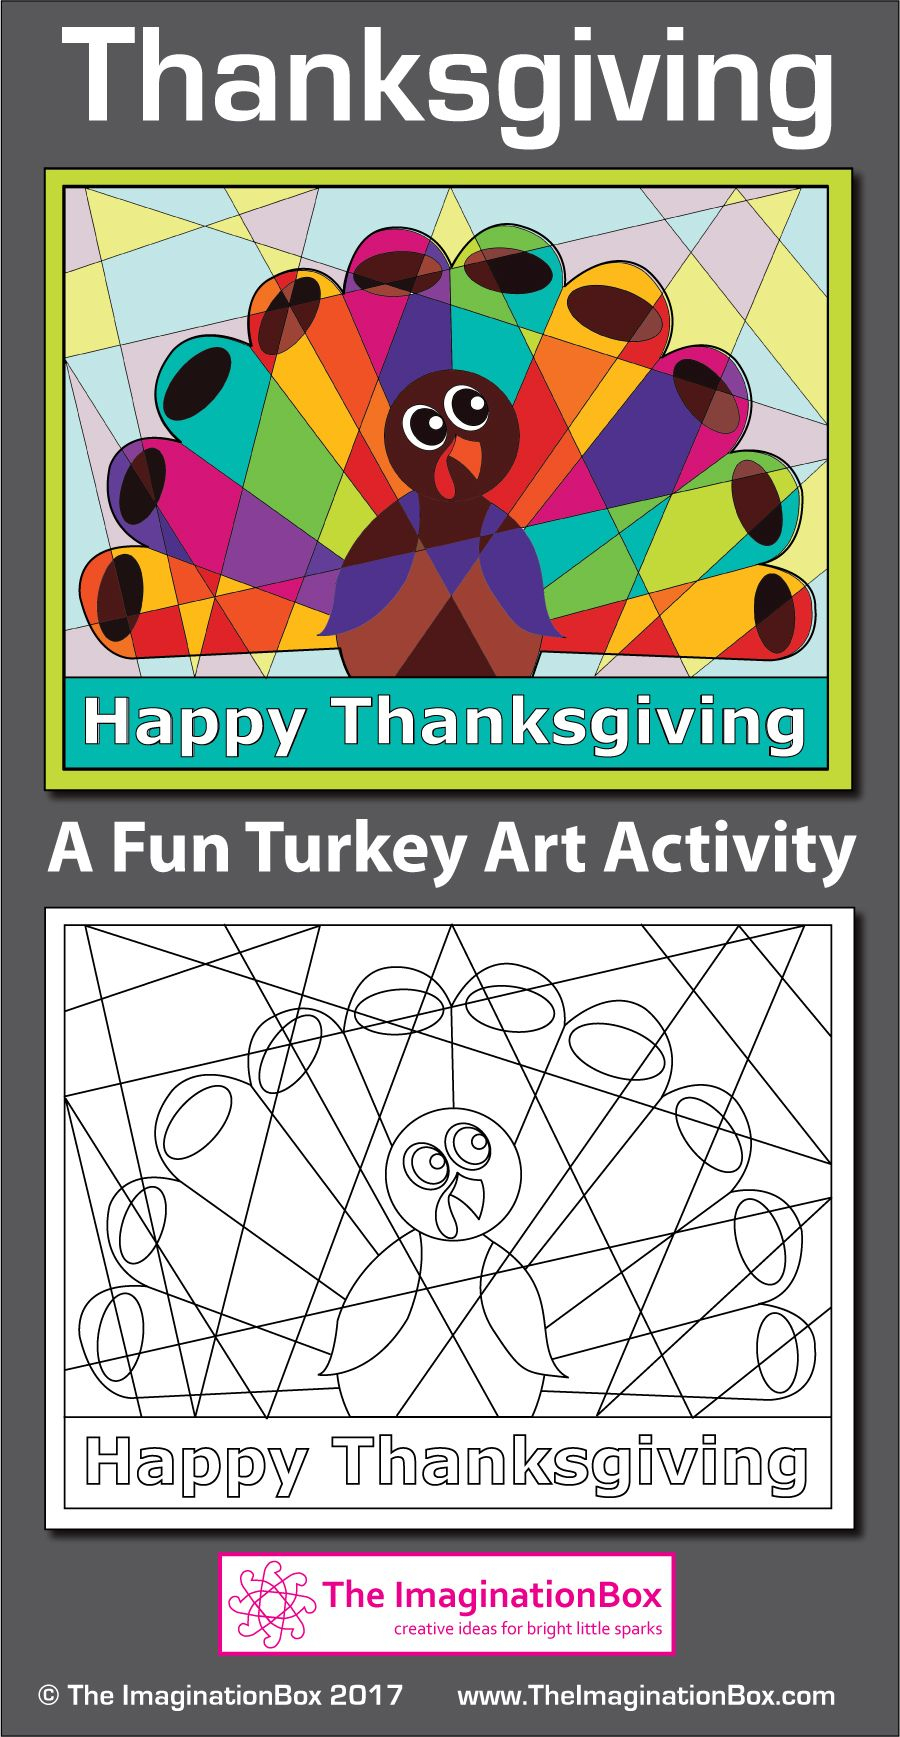 Thanksgiving Coloring Pages - Fun Turkey Art And Writing